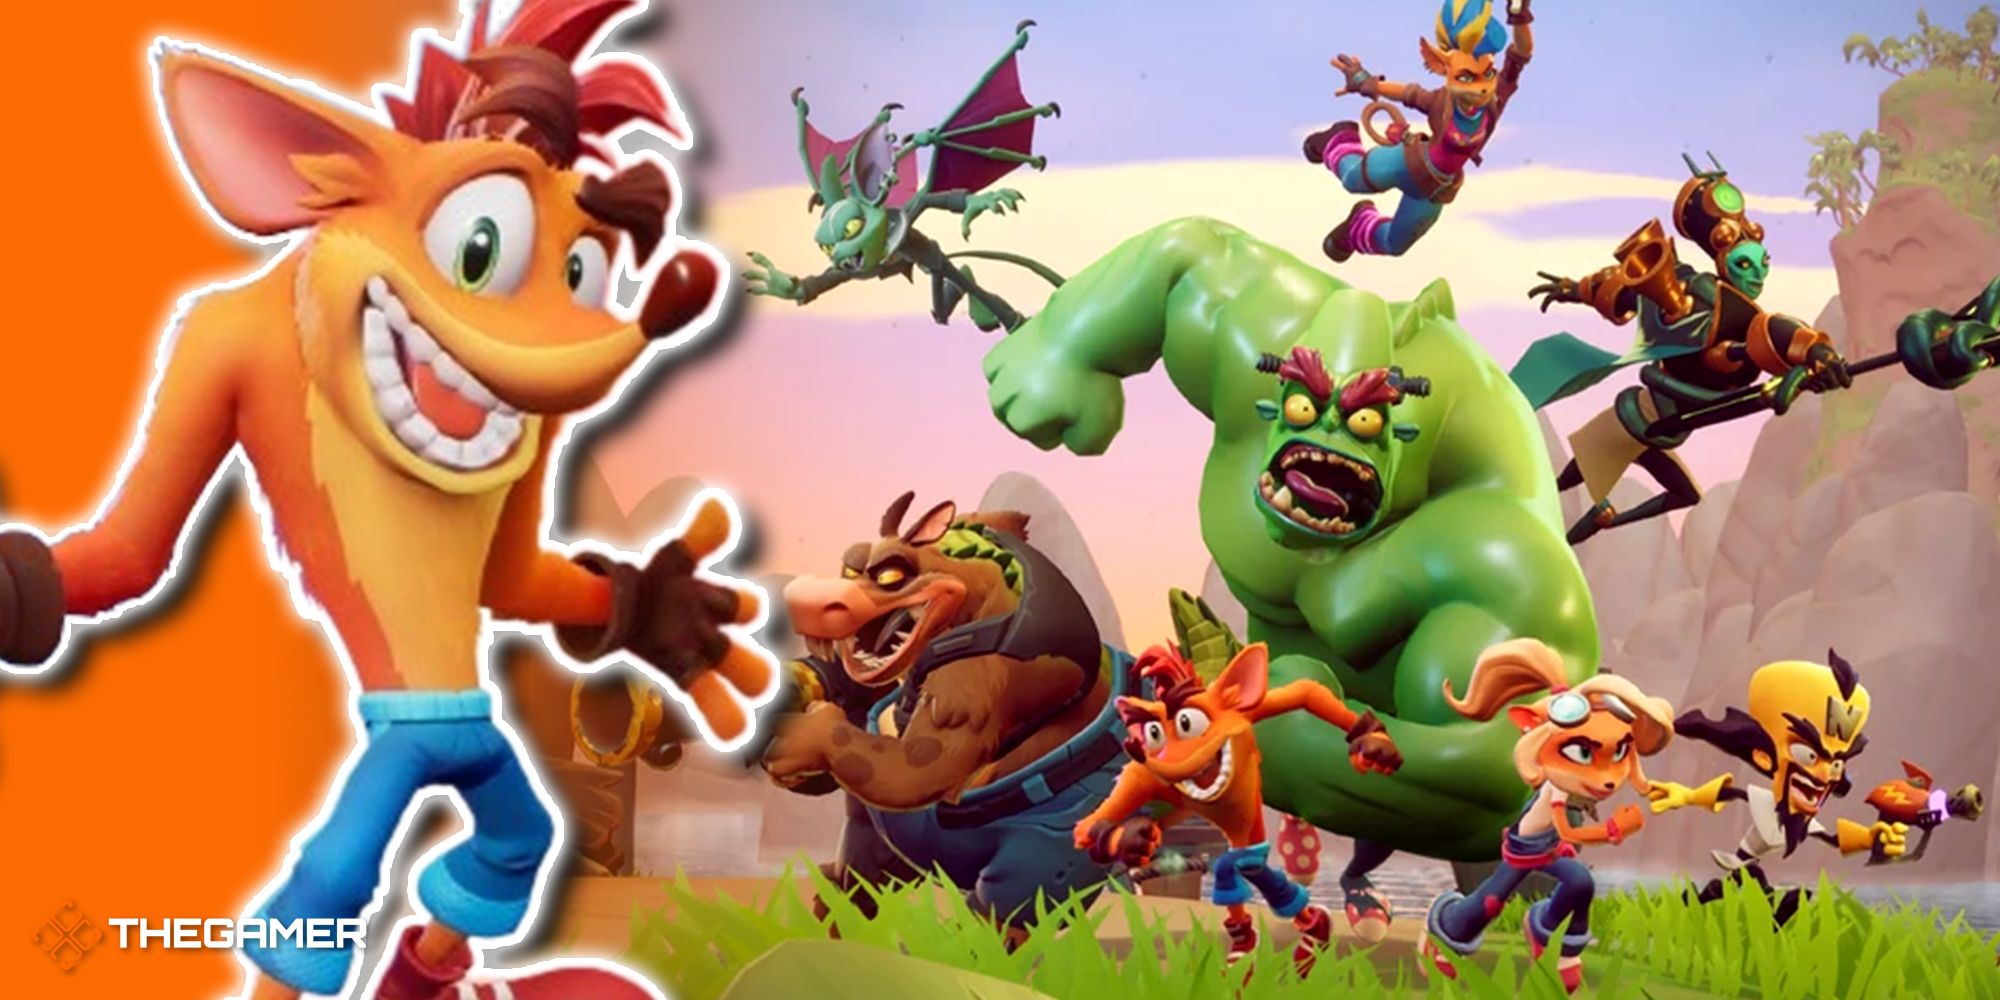 All the Crash Bandicoot characters on Switch and mobile